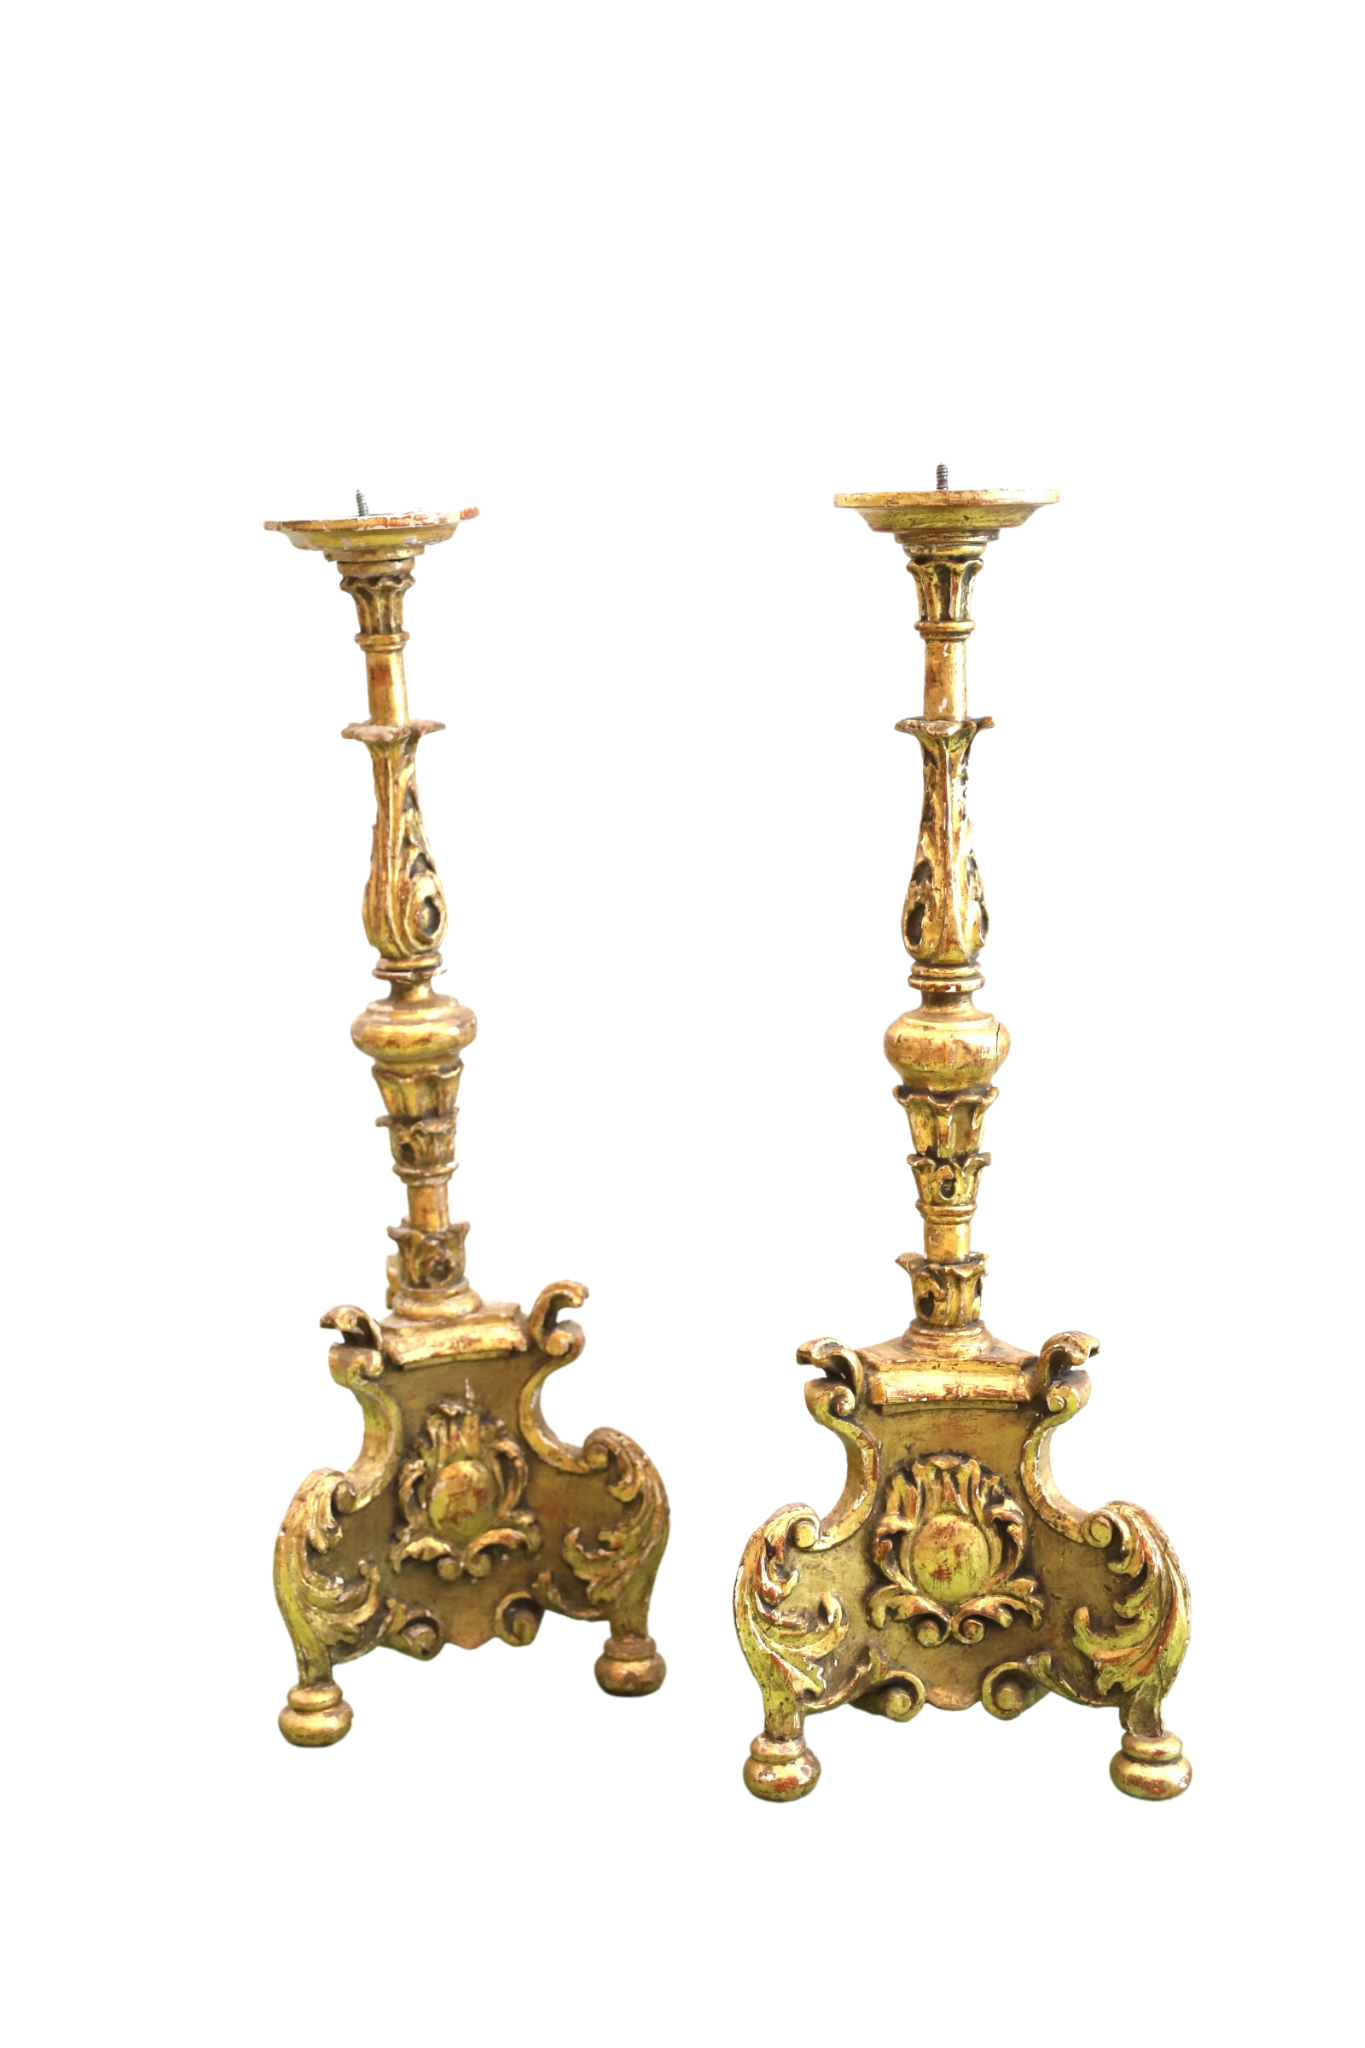 Pair of Antique Candle Stick Holders